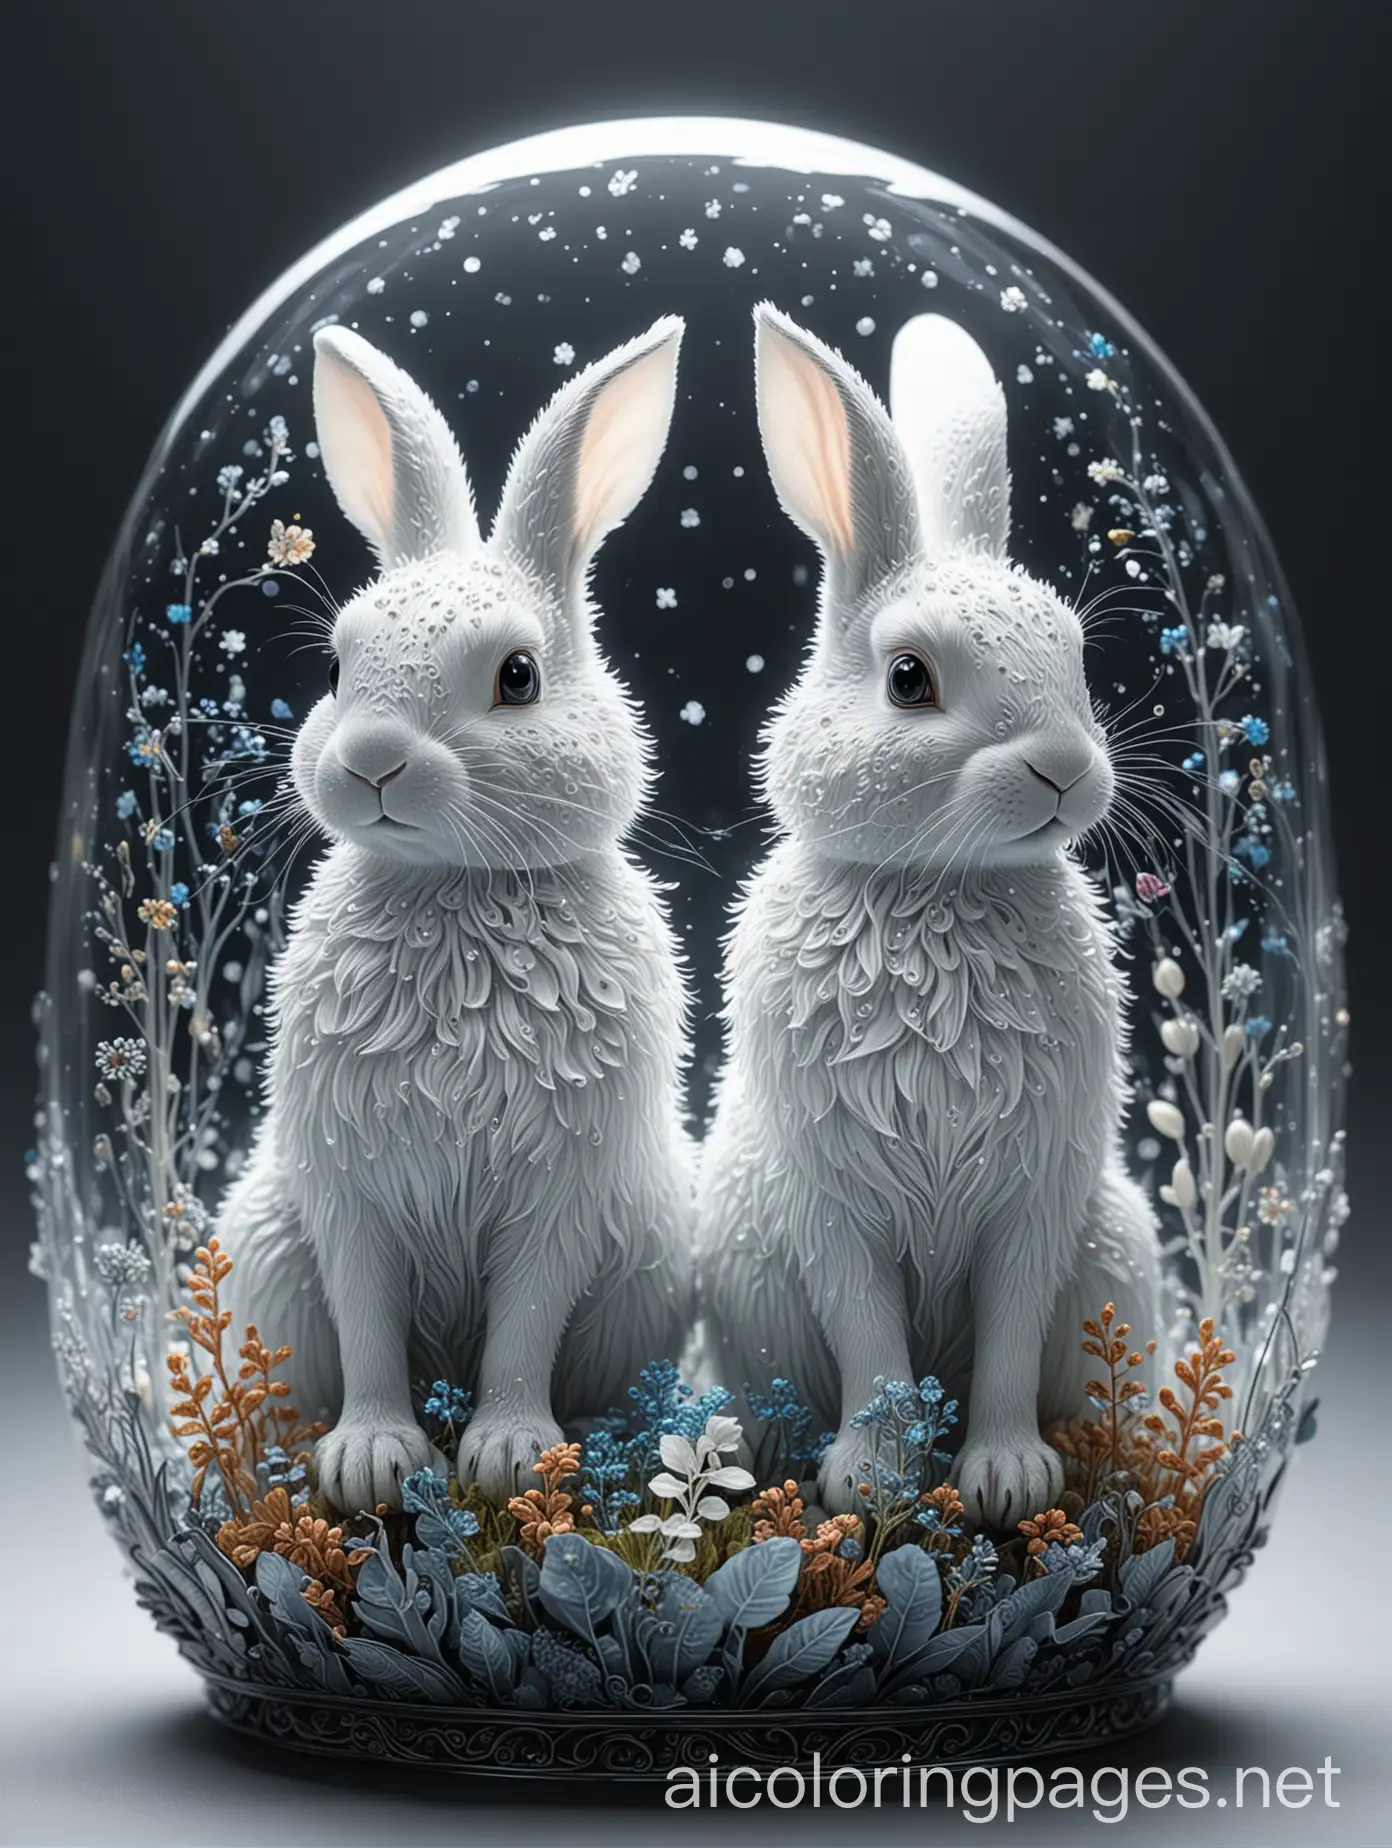 transparent glass rabbits filled with bioluminescent plants, luminous, opalescent, Insanely detailed beautiful rabbits  : meticulously detailed filigree  extreme contrast and saturation : starry galactic night sky background : magical fantasy artwork : ultra high quality : dramatic lighting : extreme contrast : rule of thirds : HDR : photorealistic : florescent light, Coloring Page, black and white, line art, white background, Simplicity, Ample White Space. The background of the coloring page is plain white to make it easy for young children to color within the lines. The outlines of all the subjects are easy to distinguish, making it simple for kids to color without too much difficulty